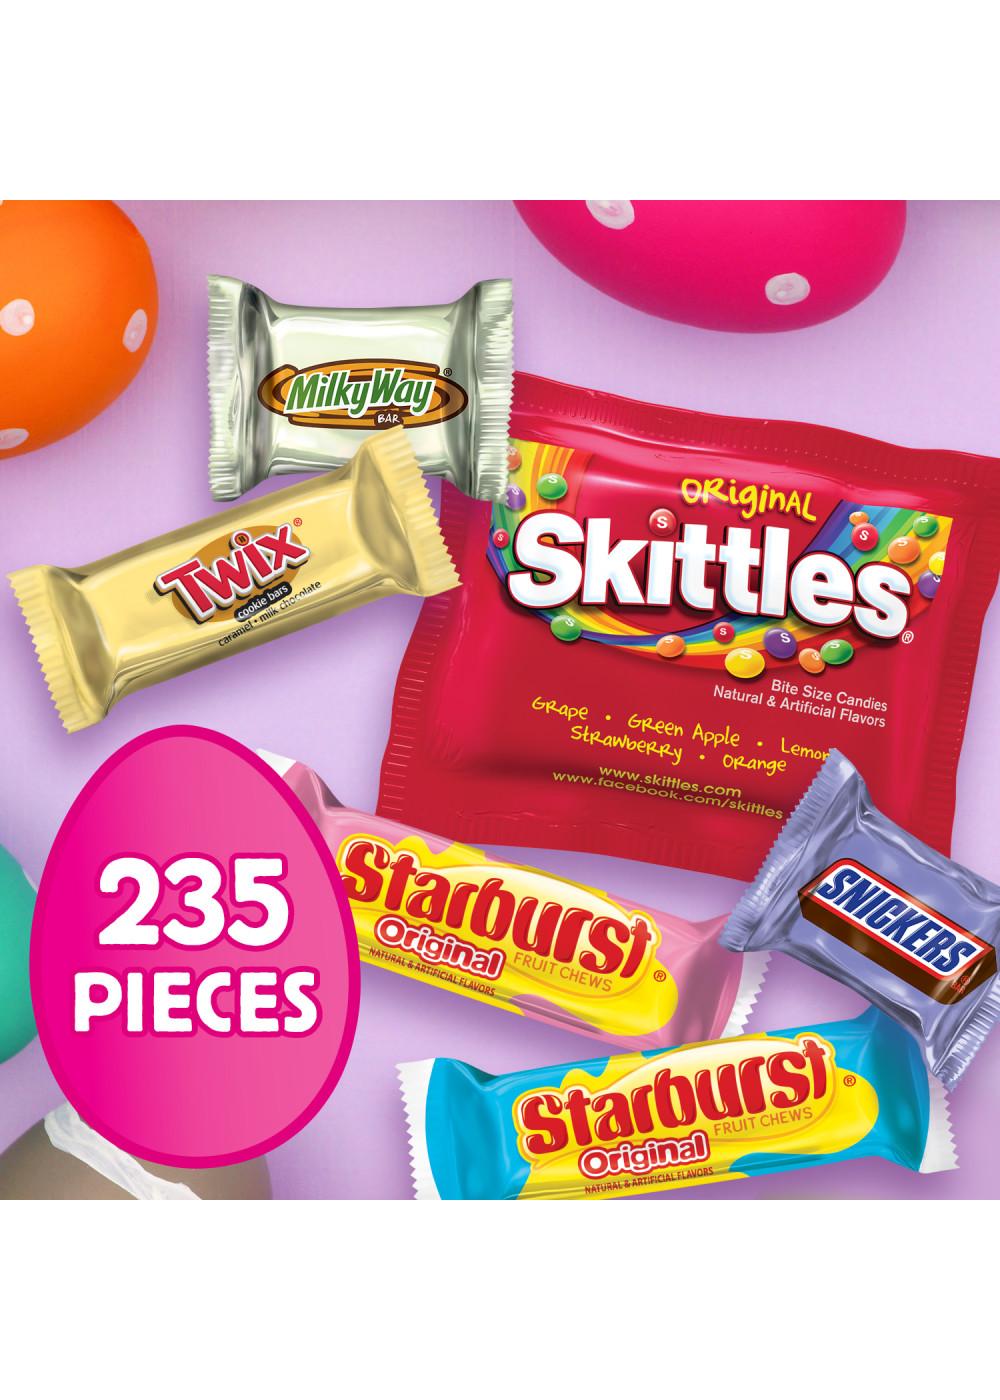 Snickers, Skittles, Twix, Starburst, & Milky Way Assorted Easter Candy; image 6 of 6